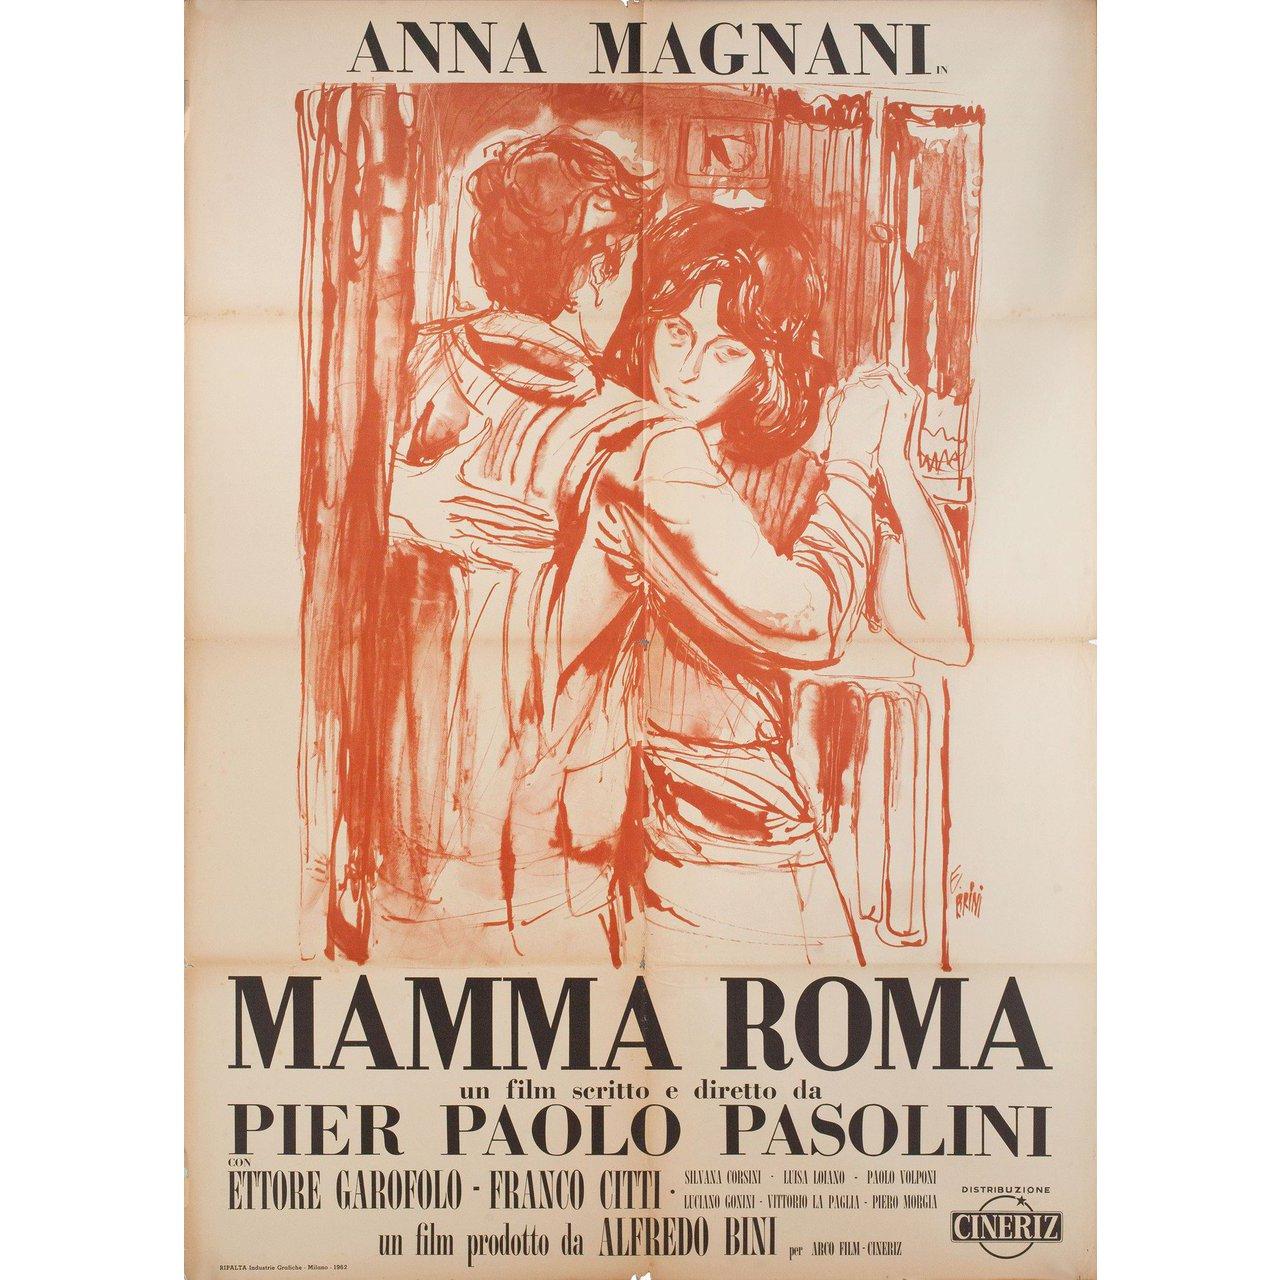 Original 1962 Italian due fogli poster by Ercole Brini for. Very good-fine condition, folded. Many original posters were issued folded or were subsequently folded. Please note: the size is stated in inches and the actual size can vary by an inch or